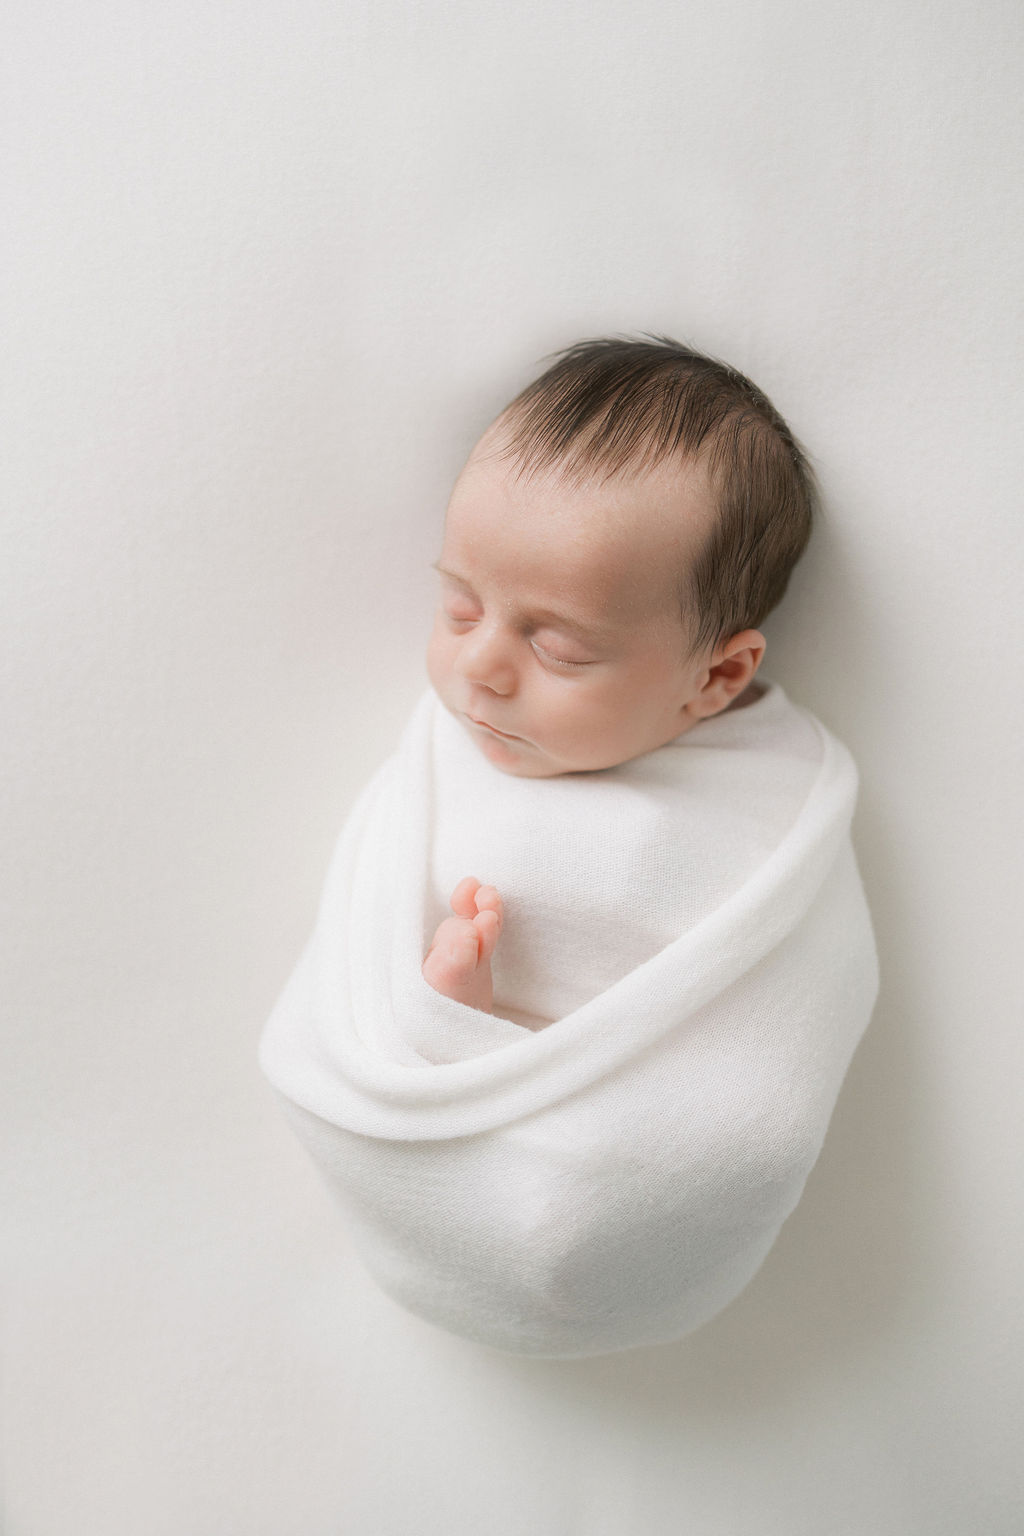 A newborn baby sleeps calmly in a studio while wrapped tight in a white swaddle